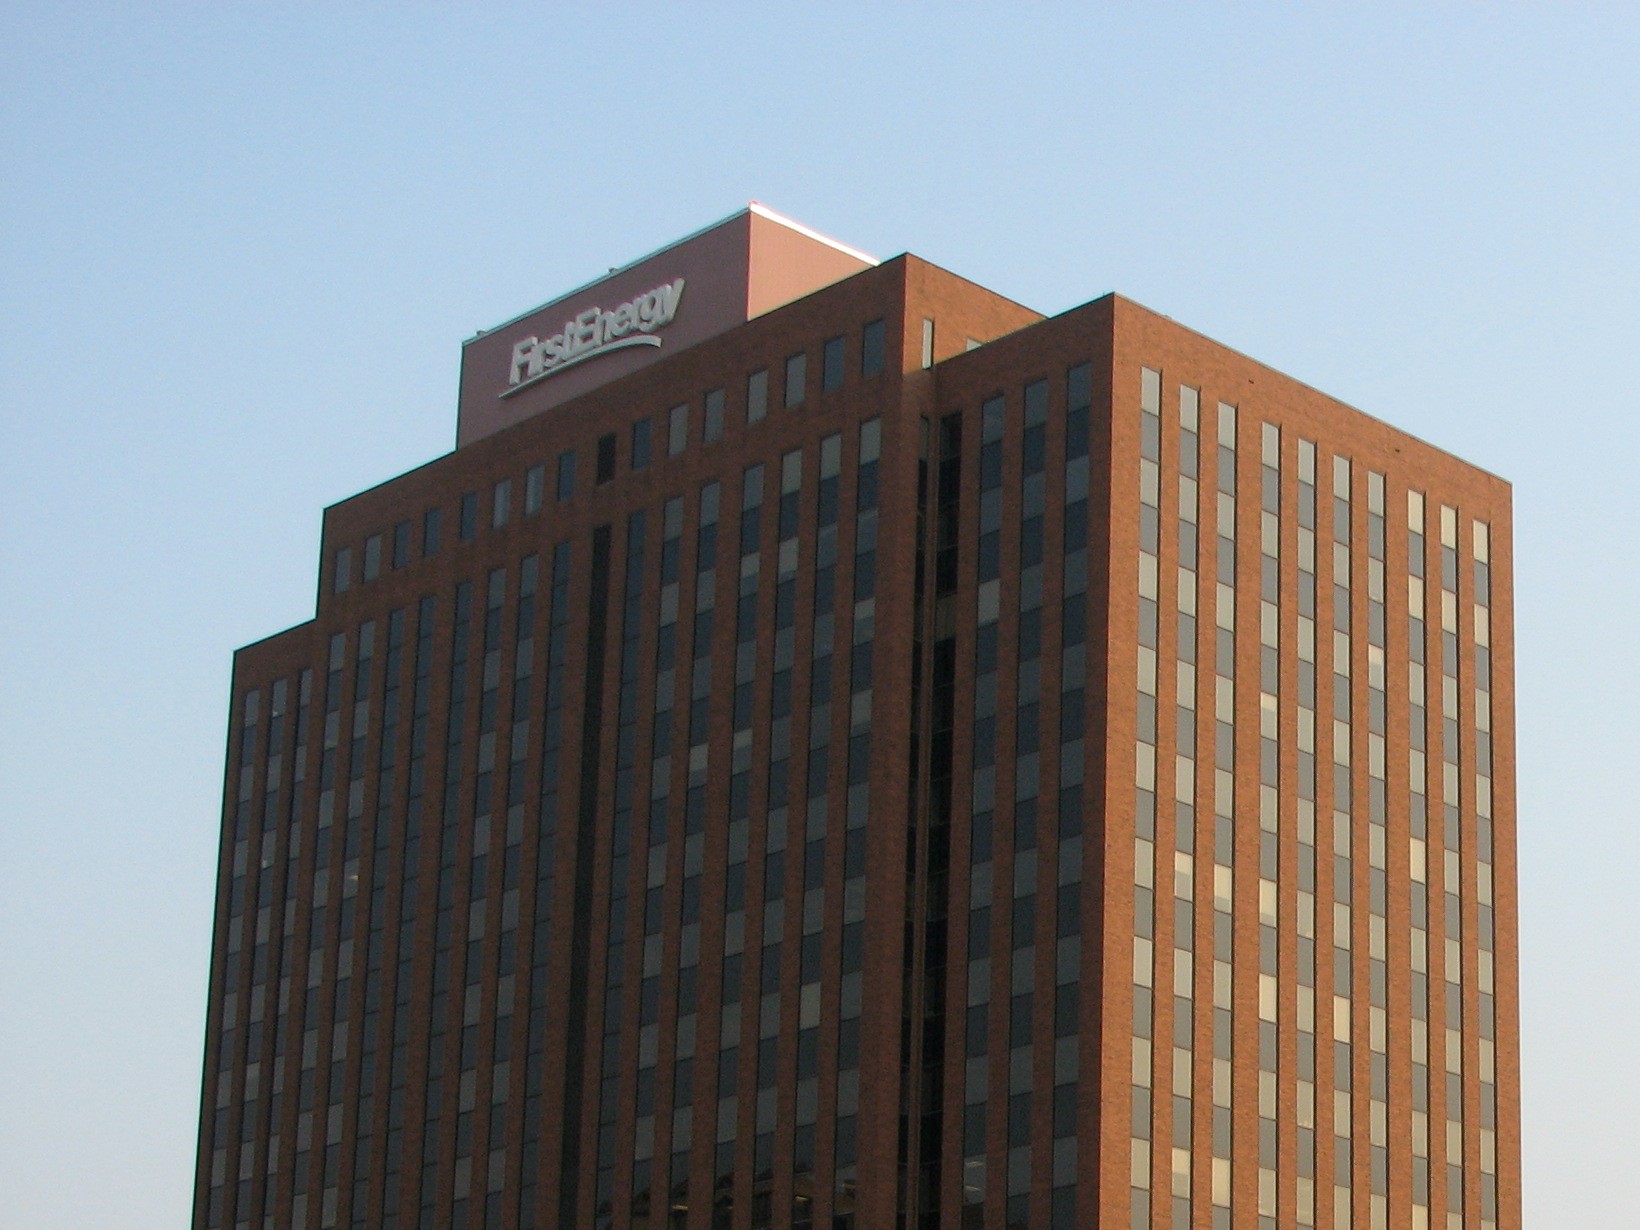 The FirstEnergy Building in Akron, Ohio.